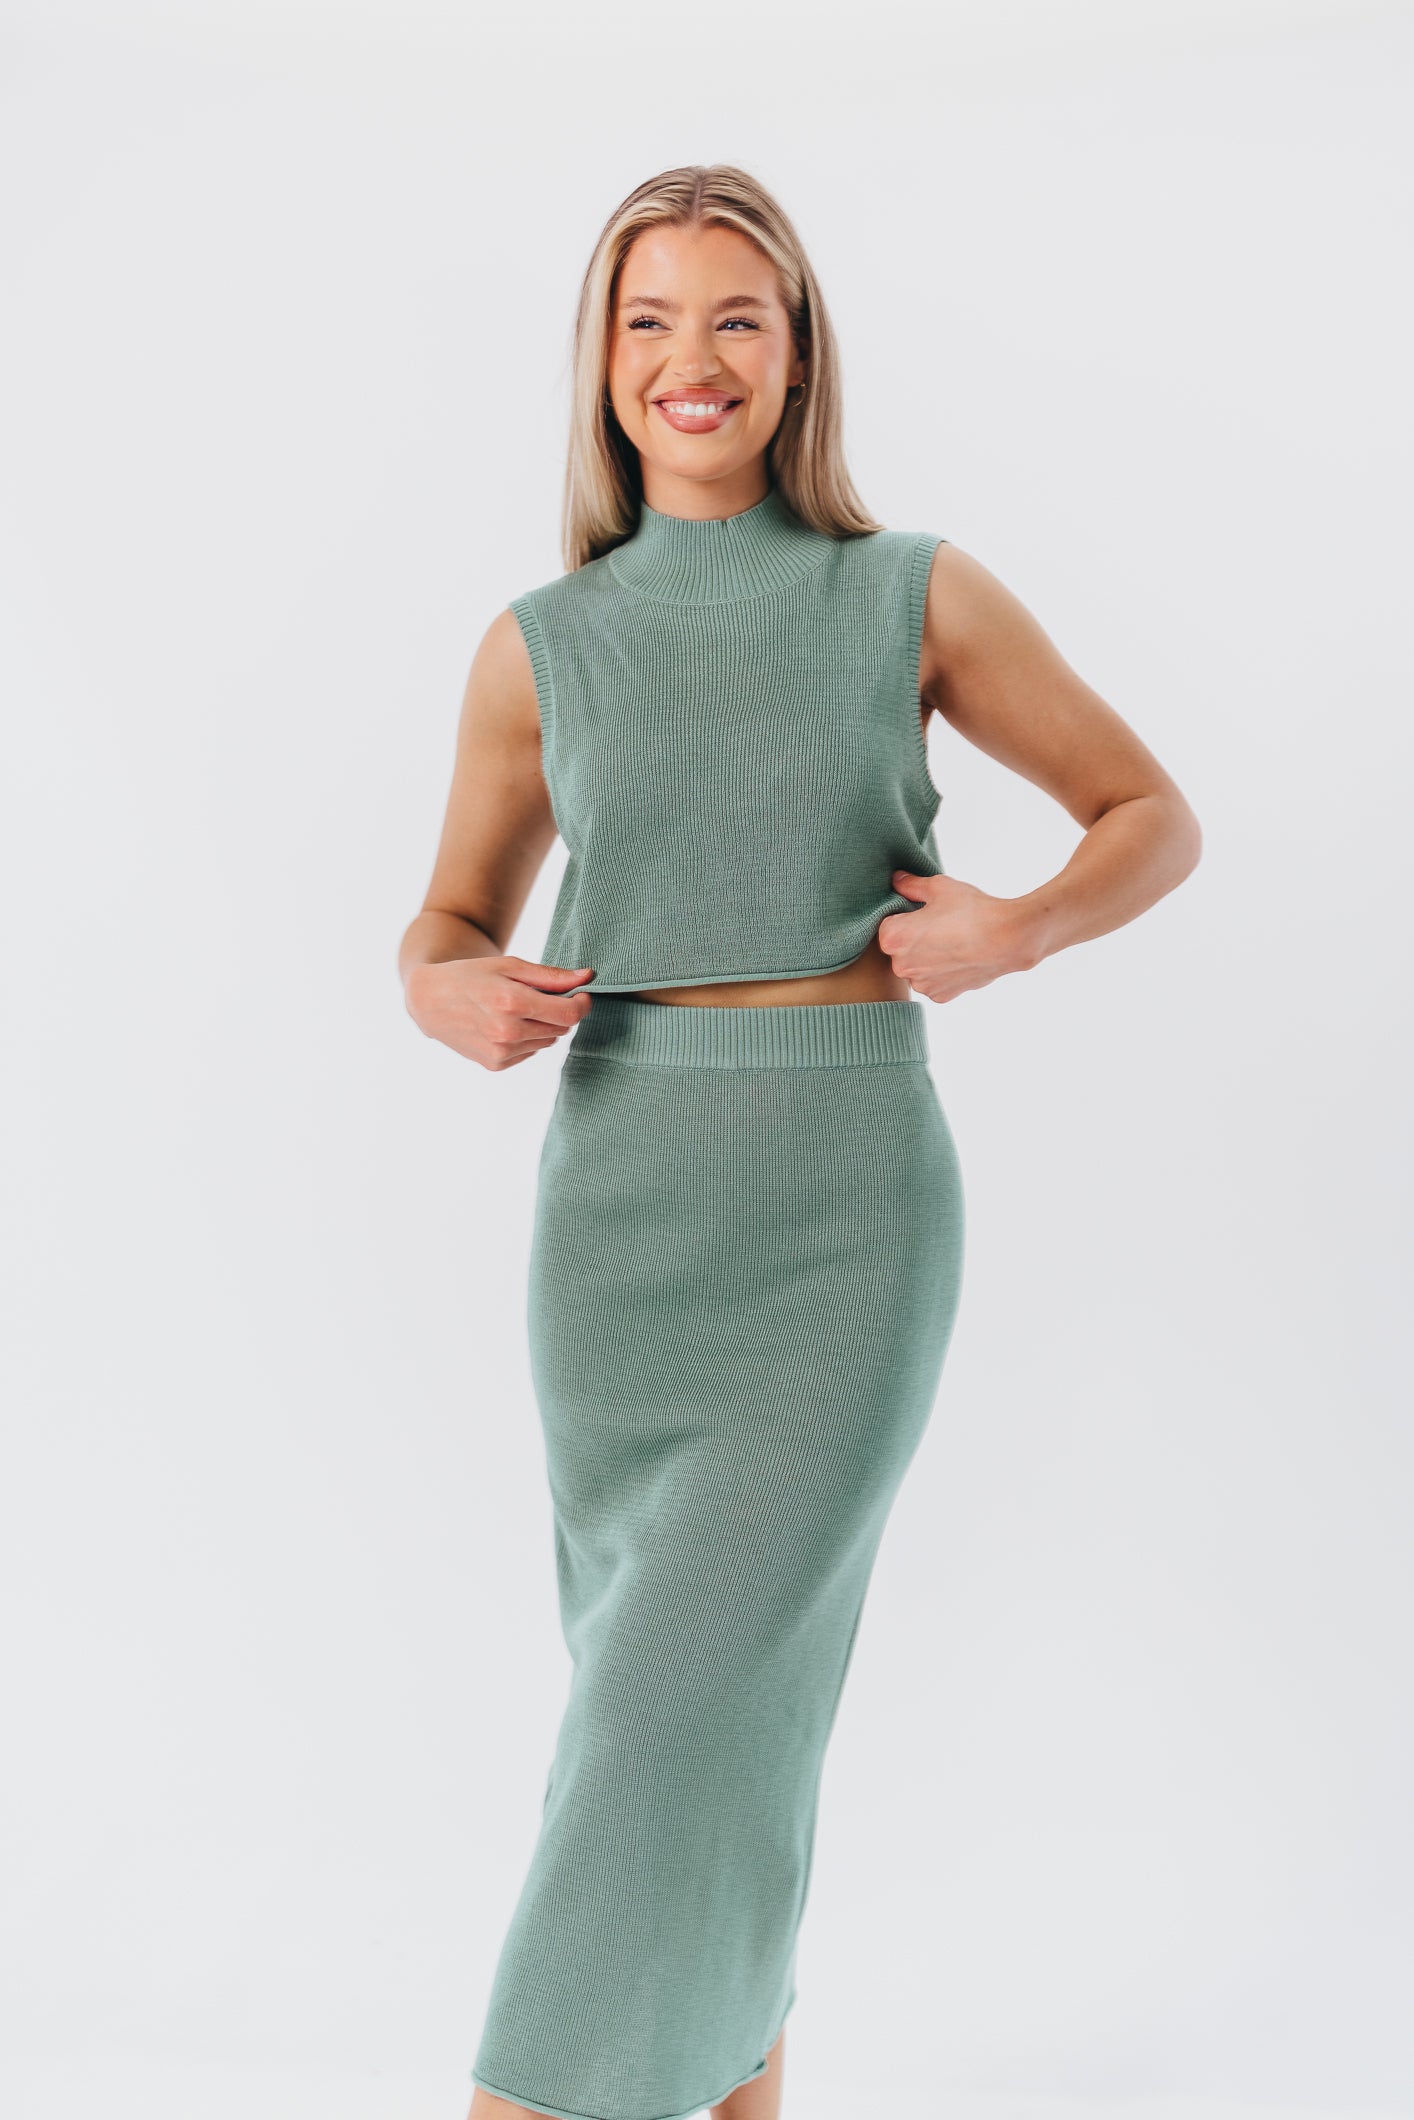 Cassie Knit Midi Skirt in Teal Green